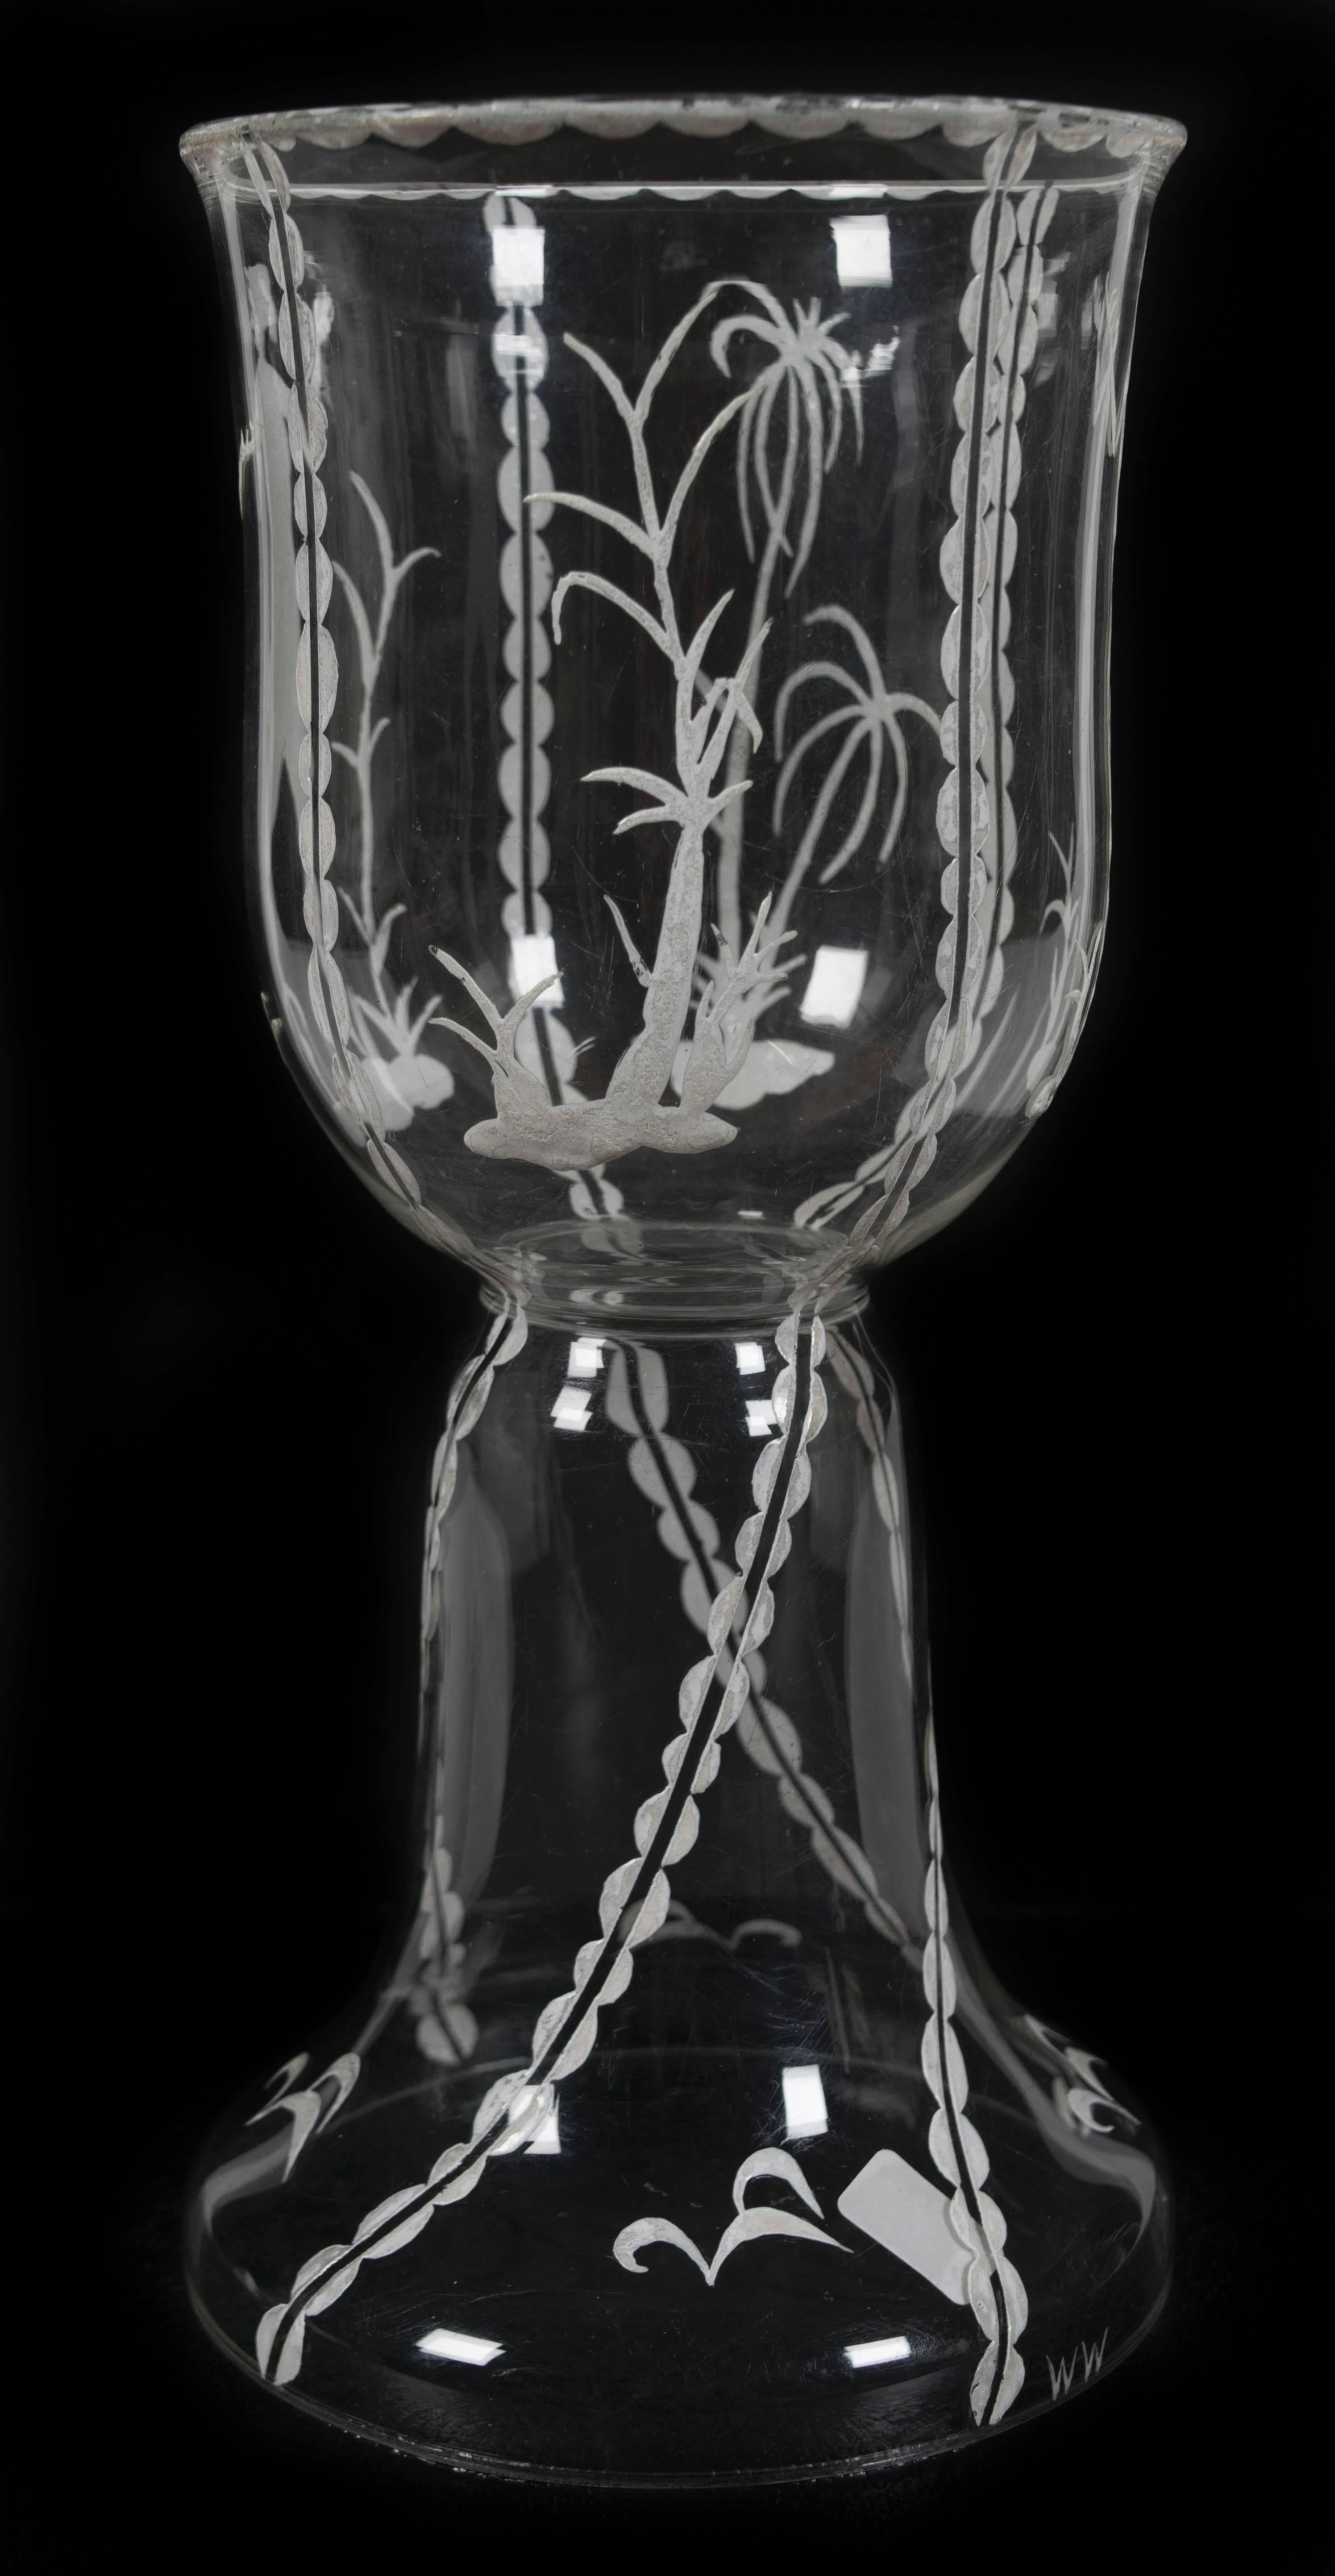 An etched glass "pokal" cup designed by Dagobert Peche and Mathilde Flogl and produced by the Wiener Werkstatte, Vienna, circa 1920.

Peche (1887-1923) joined the Wiener Werkstatte as artistic director in 1915. He is credited for